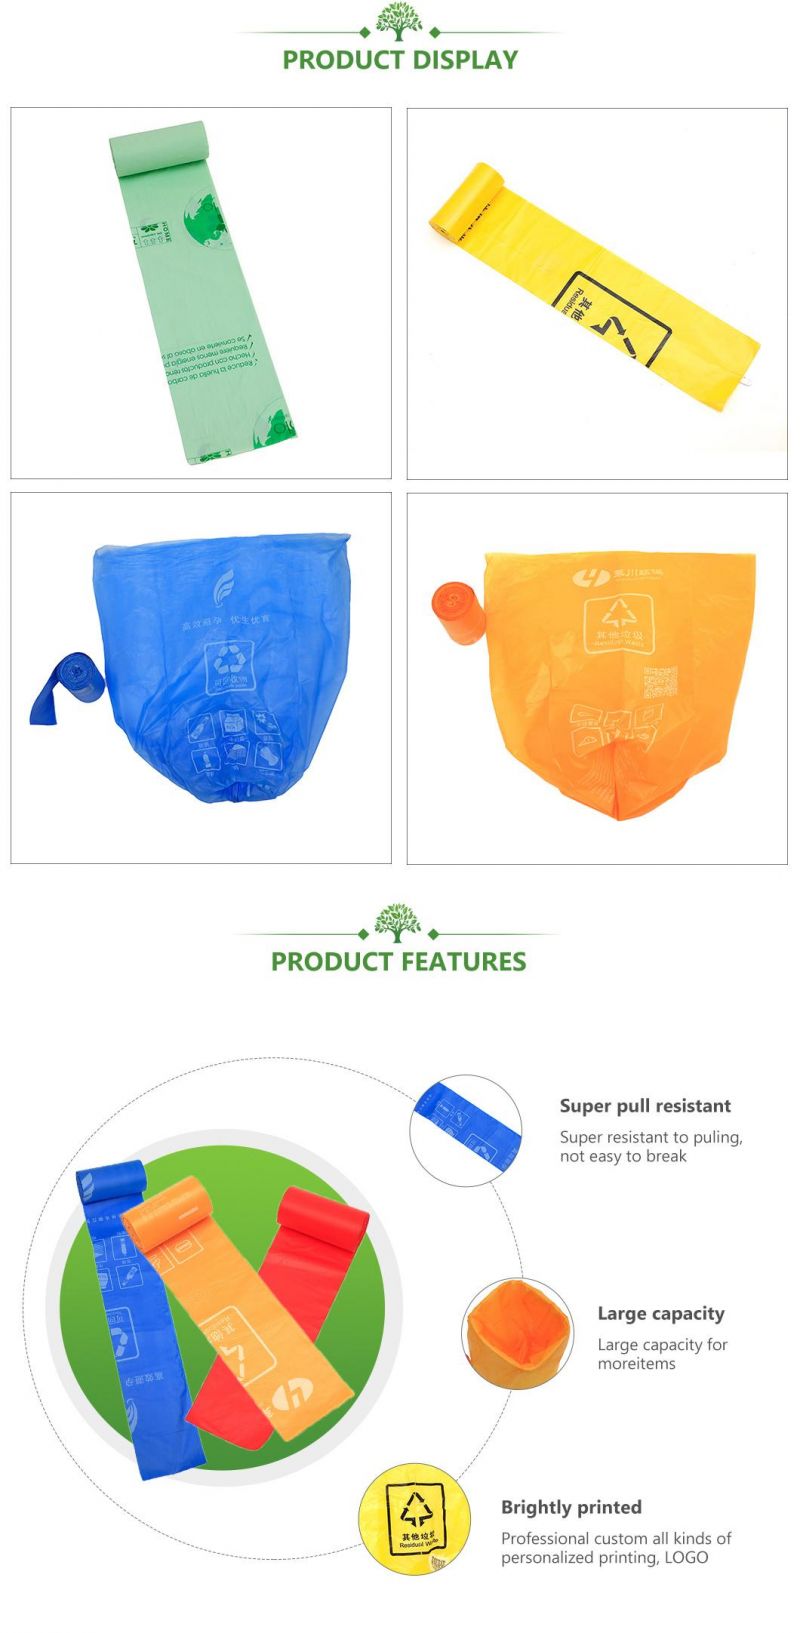 China 100% Biodegradable Bags Compostable Garbage Bags Manufacturer/Supplier/Wholesale/Factory